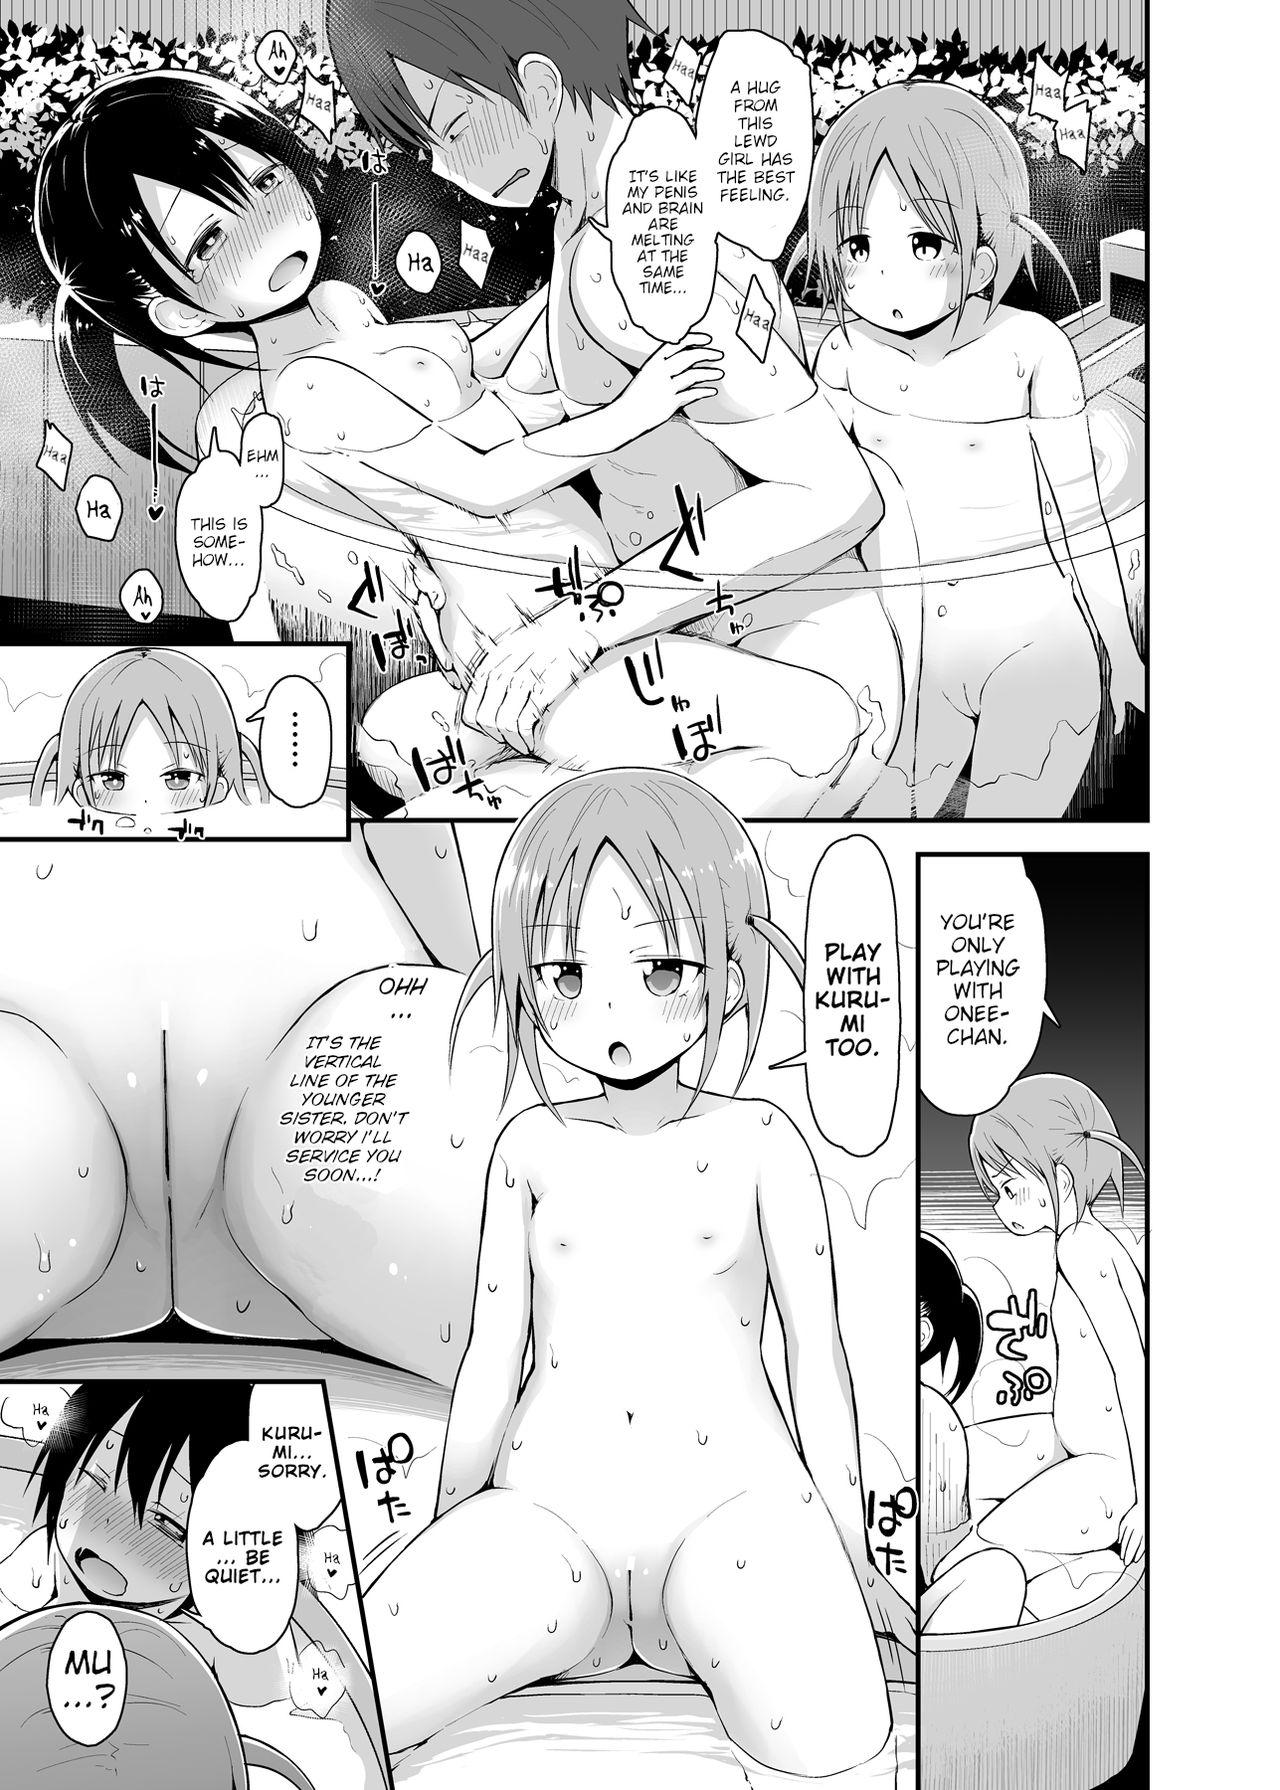 Onnanoko datte Otokoyu ni Hairitai 3 | They may just be little girls, but they still want to enter the men's bath! 3 17